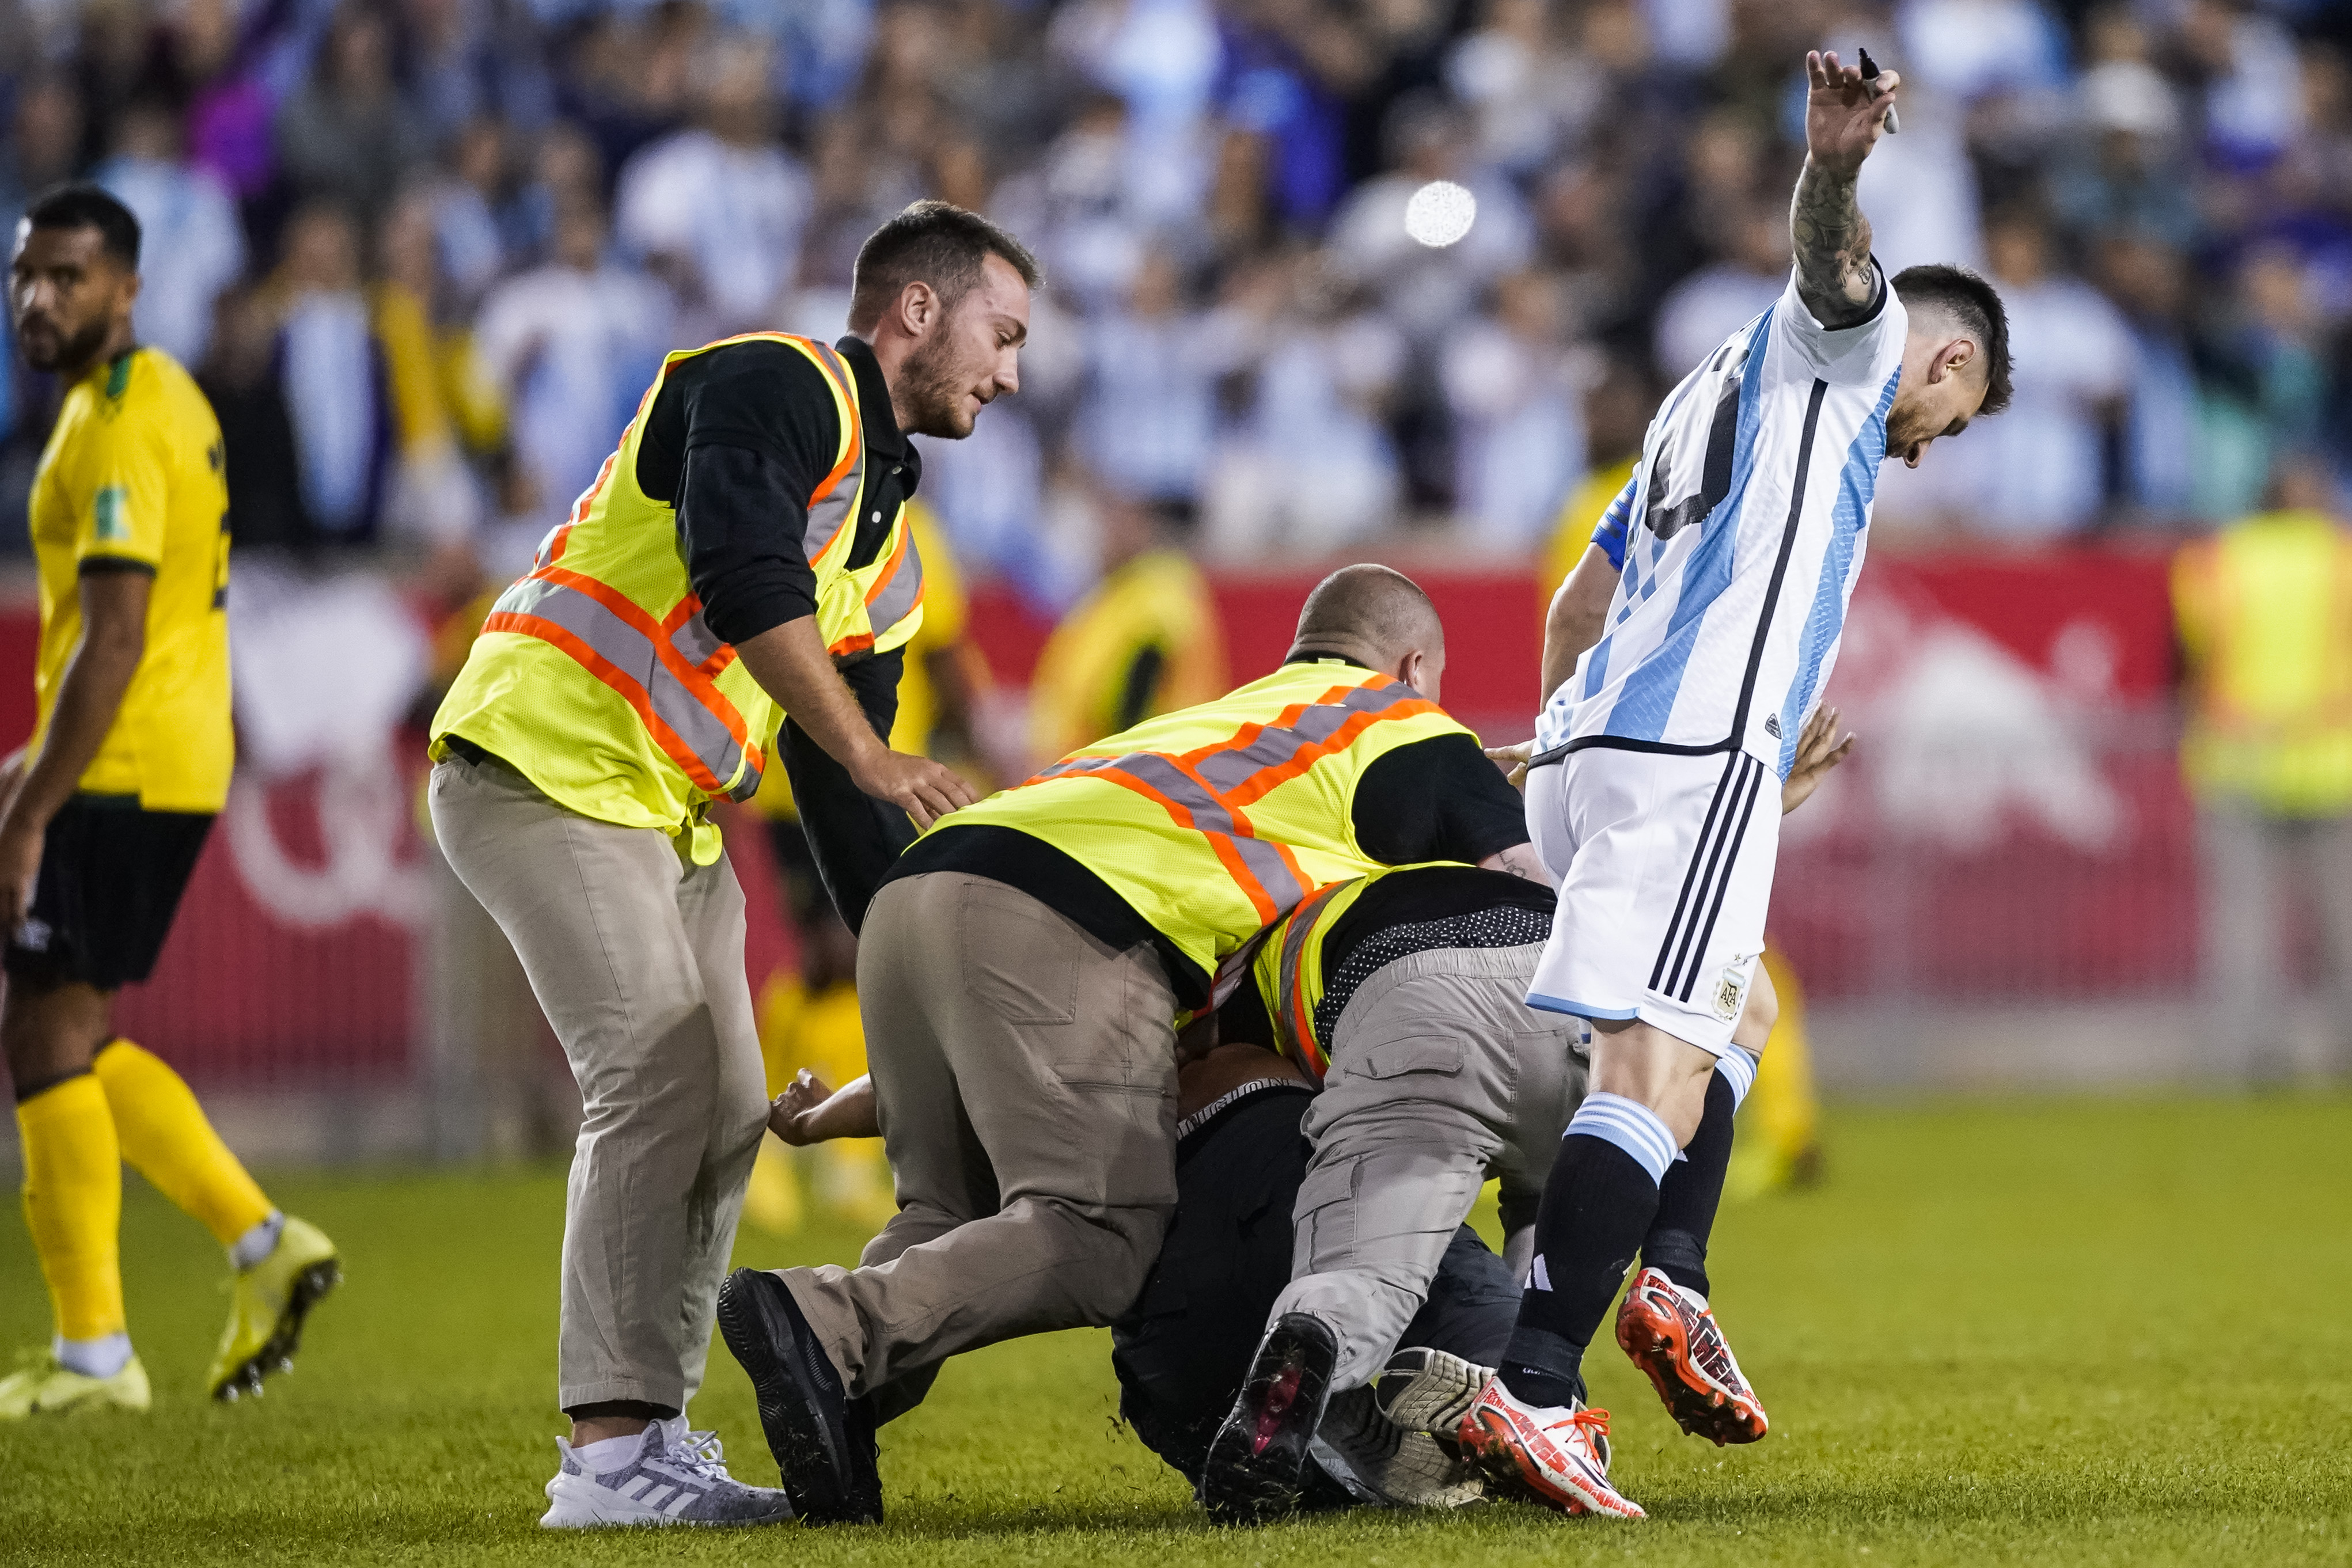 News 2022 Lionel Messi accosted by fans in Argentina vs Jamaica match